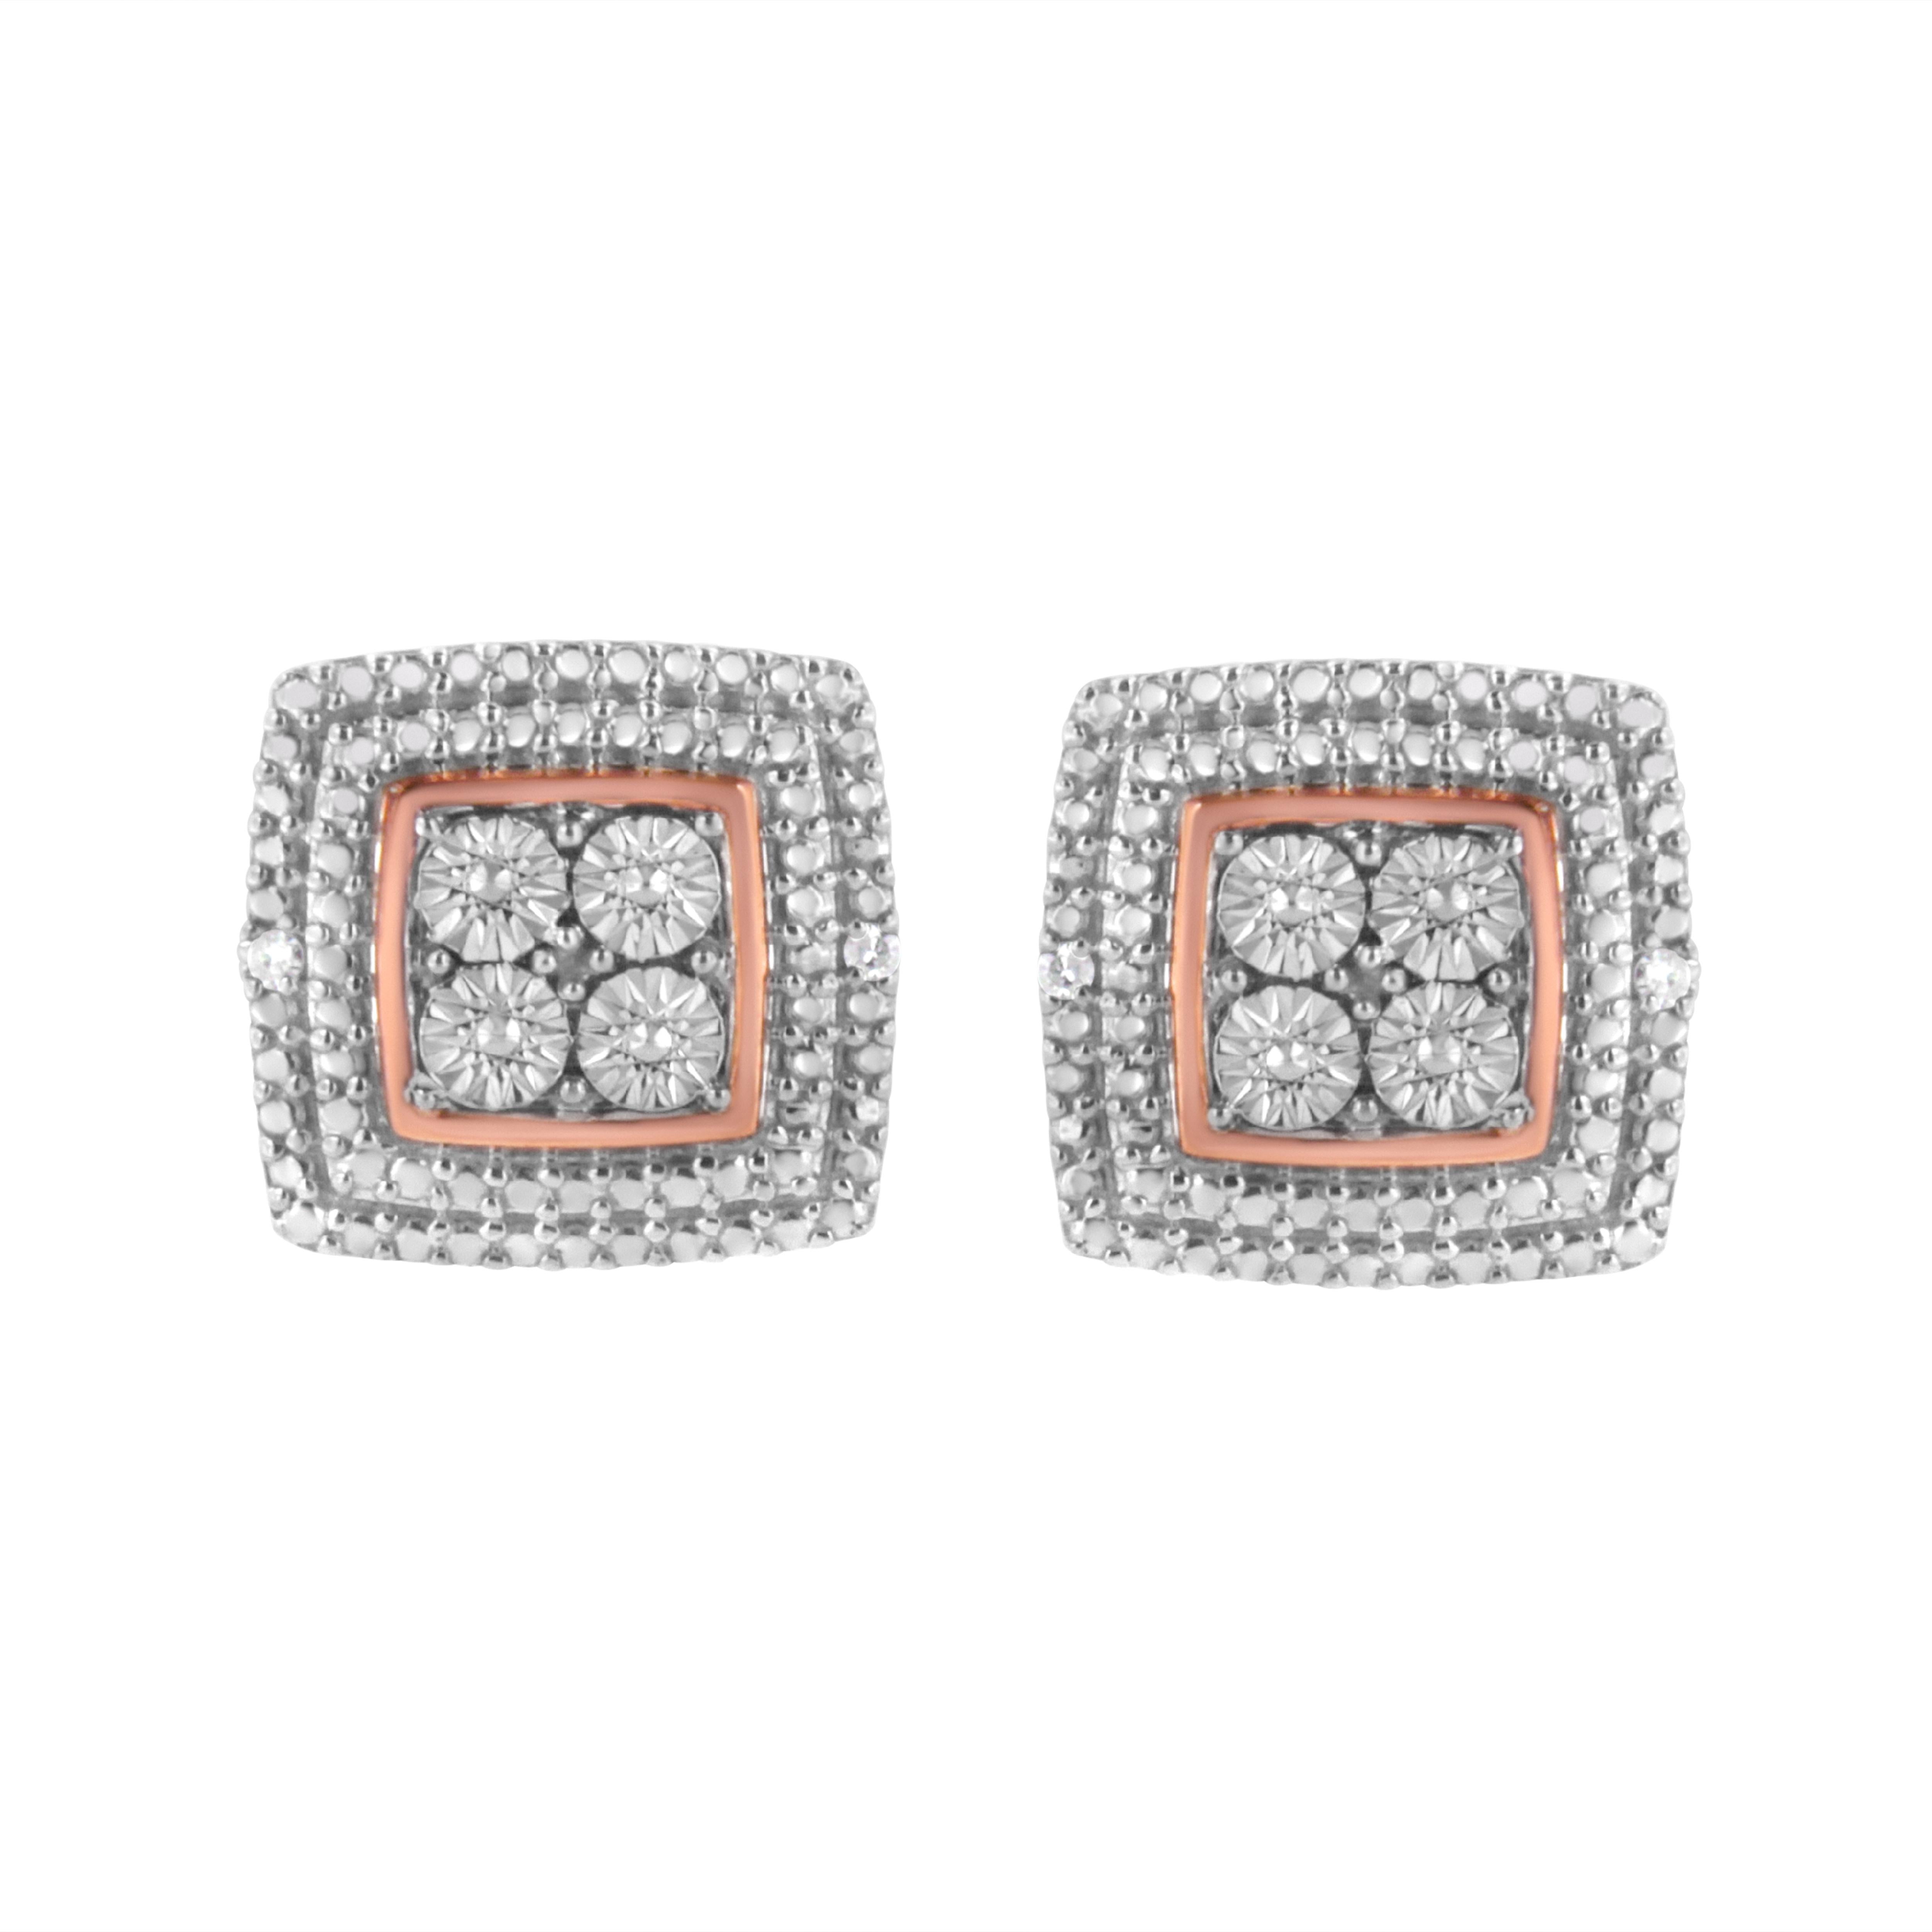 This stunning square-shaped stud earrings are made with an assortment of 10k yellow, white, and rose-gold plated sterling silver. The front-facing design of this piece features white beading with a sliver of rose-gold plated sterling silver at the